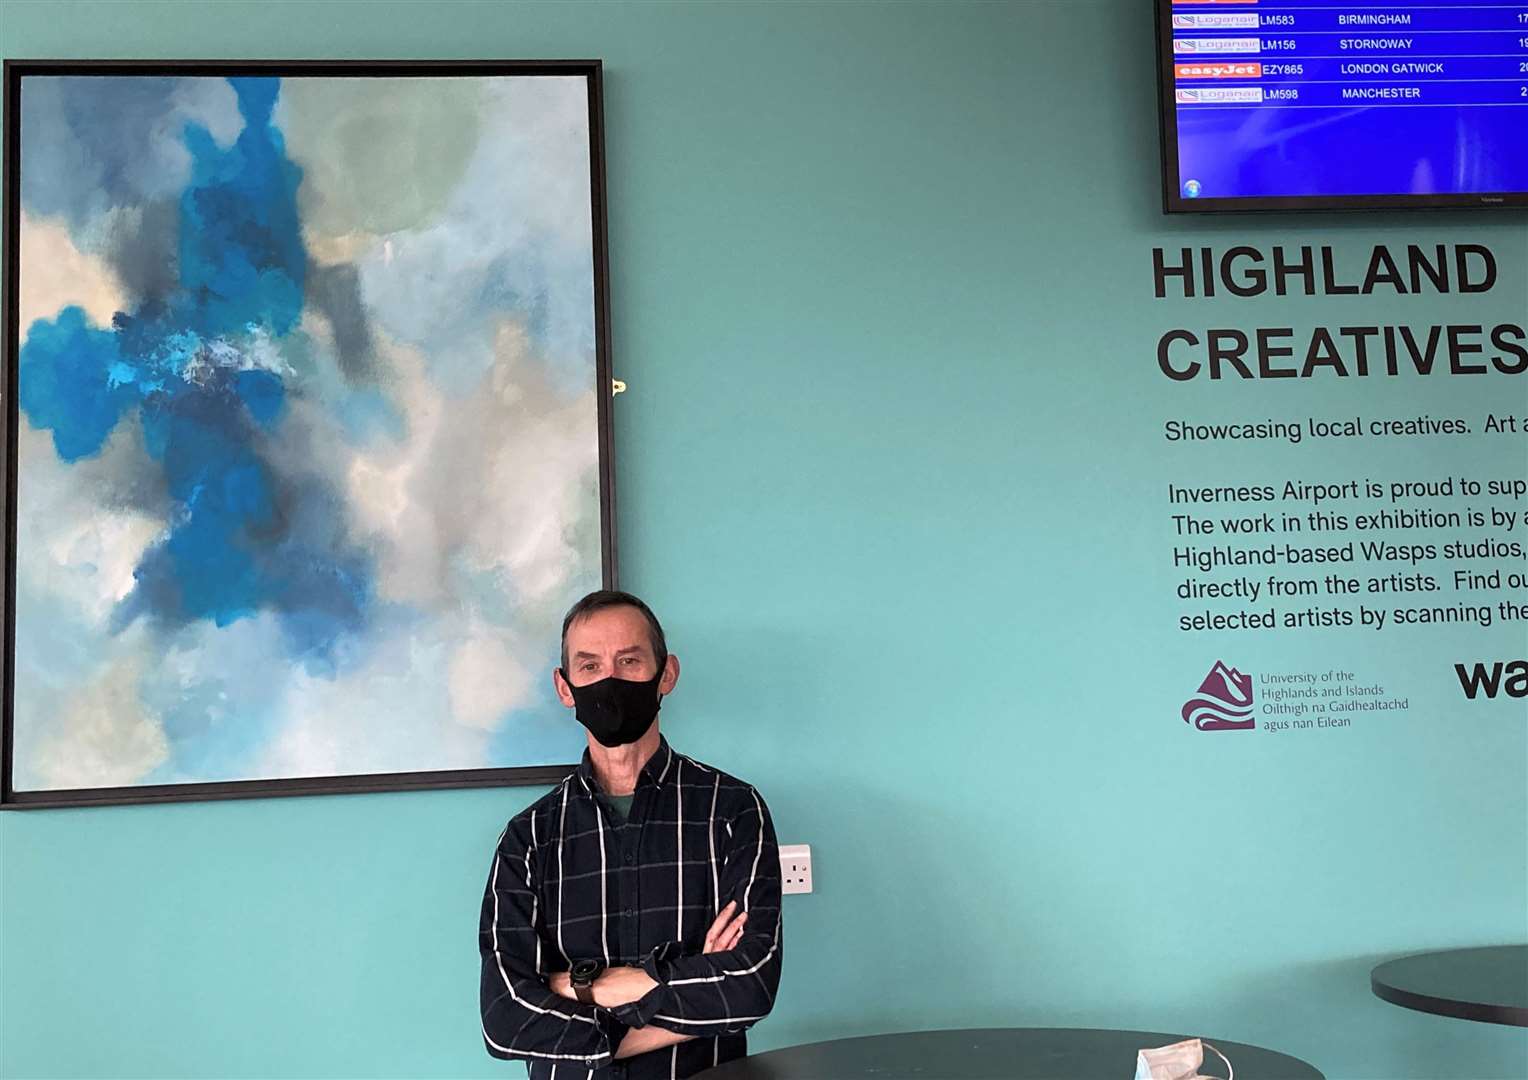 Artist Martin Irish with one of his exhibits at Inverness Airport.